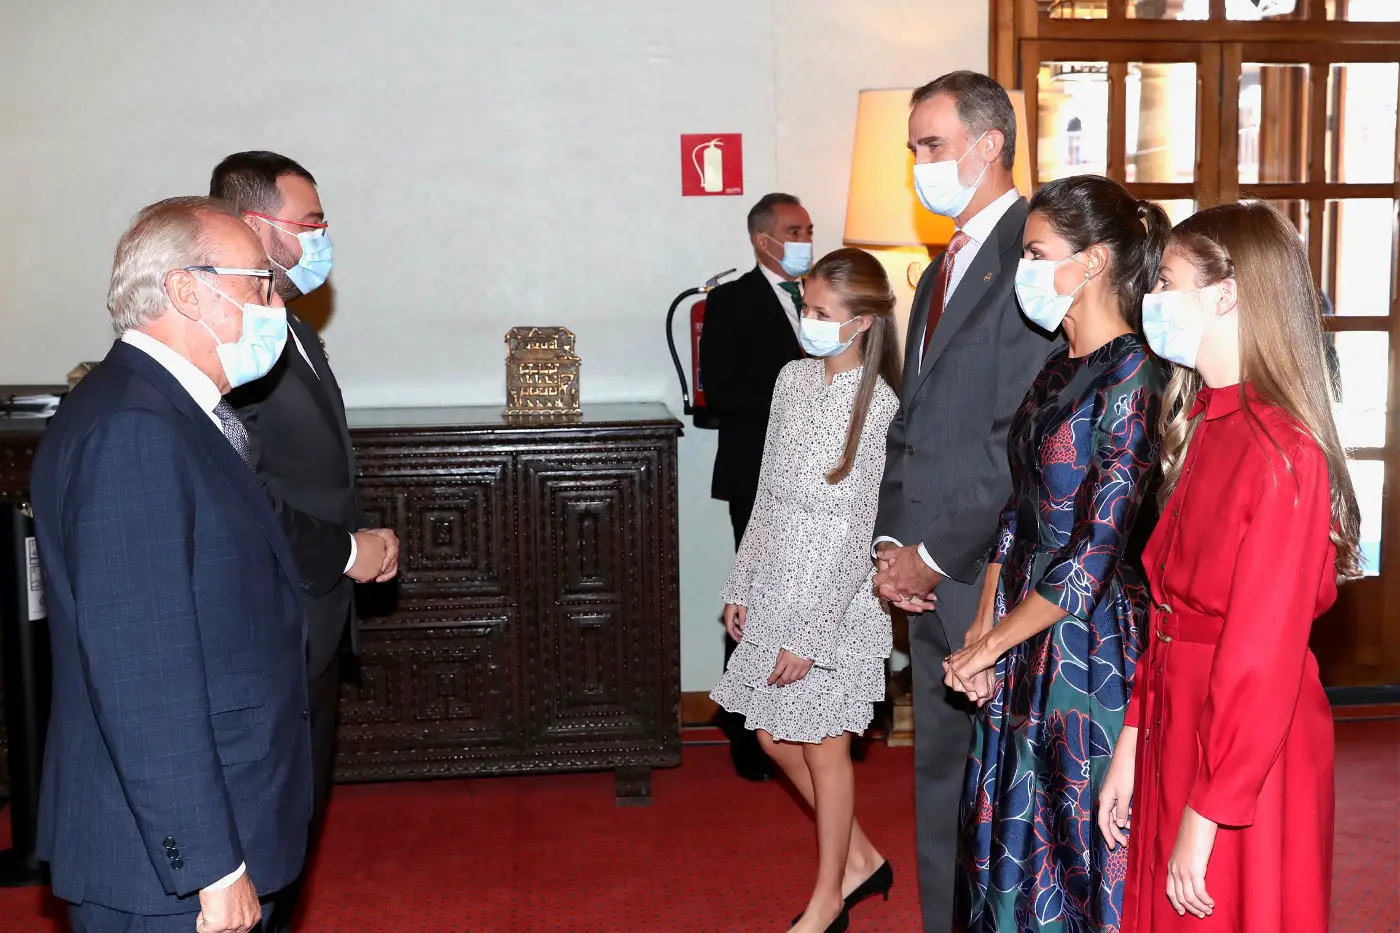 Spanish Royals held an audience with the winners of Princess of Asturias Awards